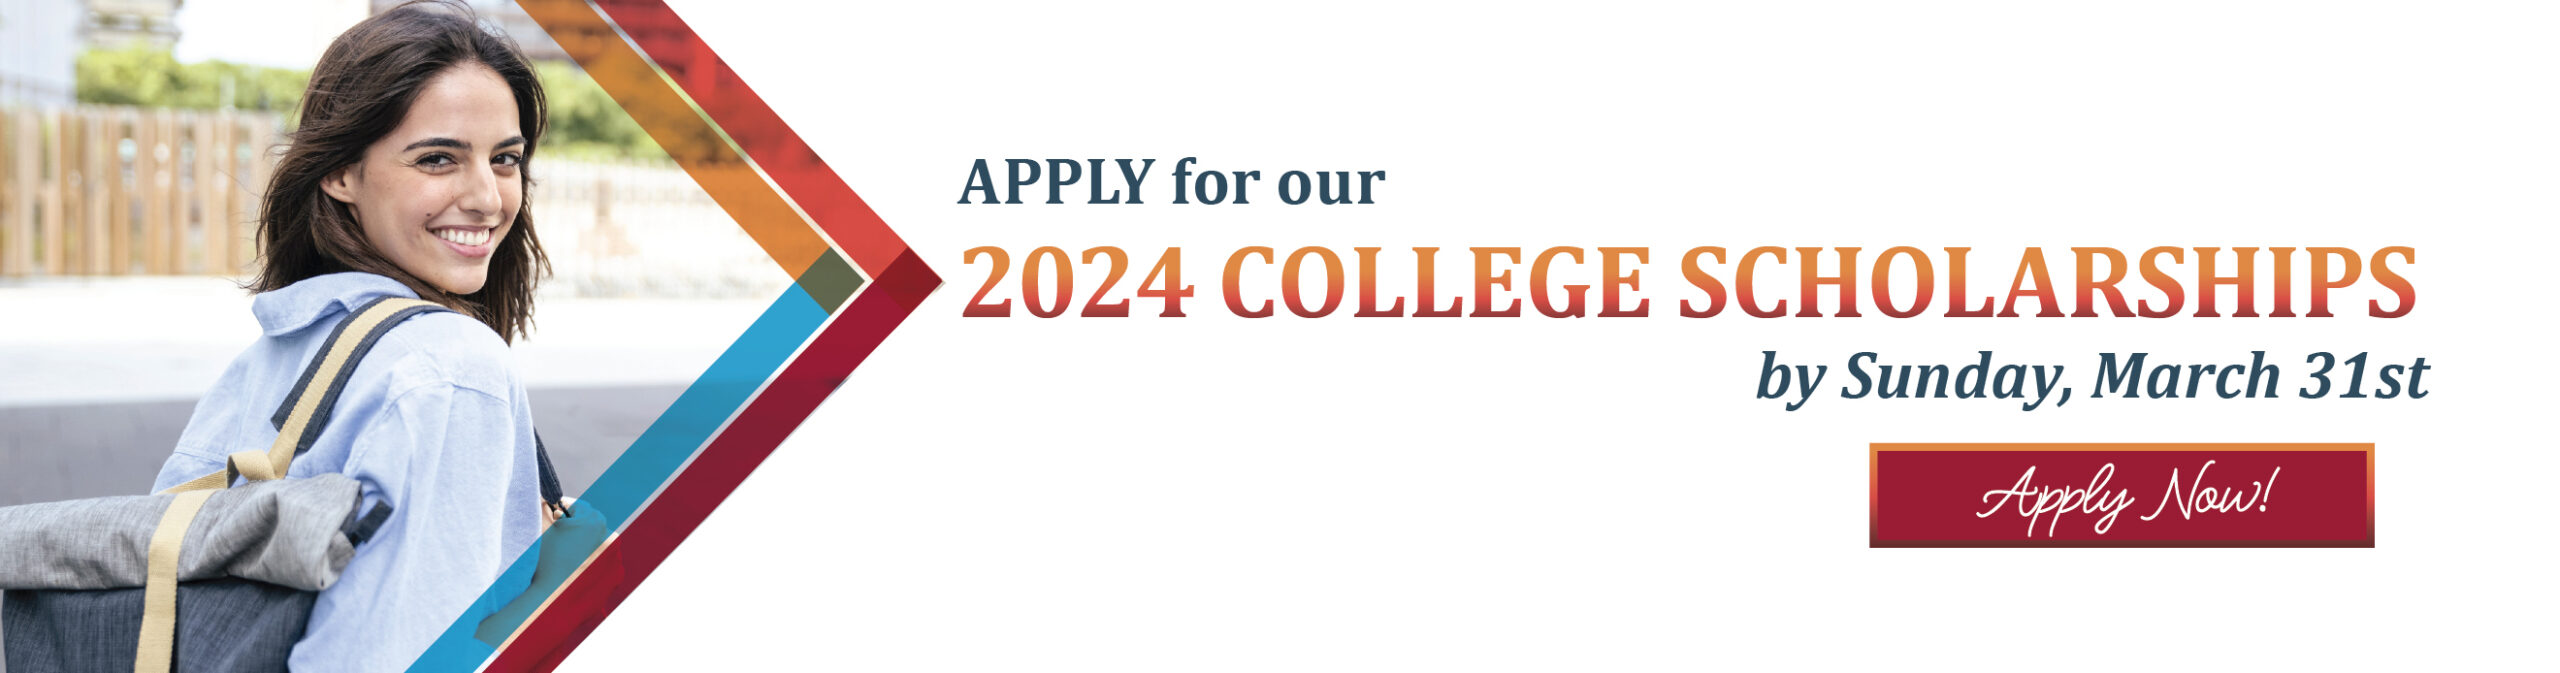 Apply for our 2024 College Scholarships by Sunday, March 31st. Apply Now!